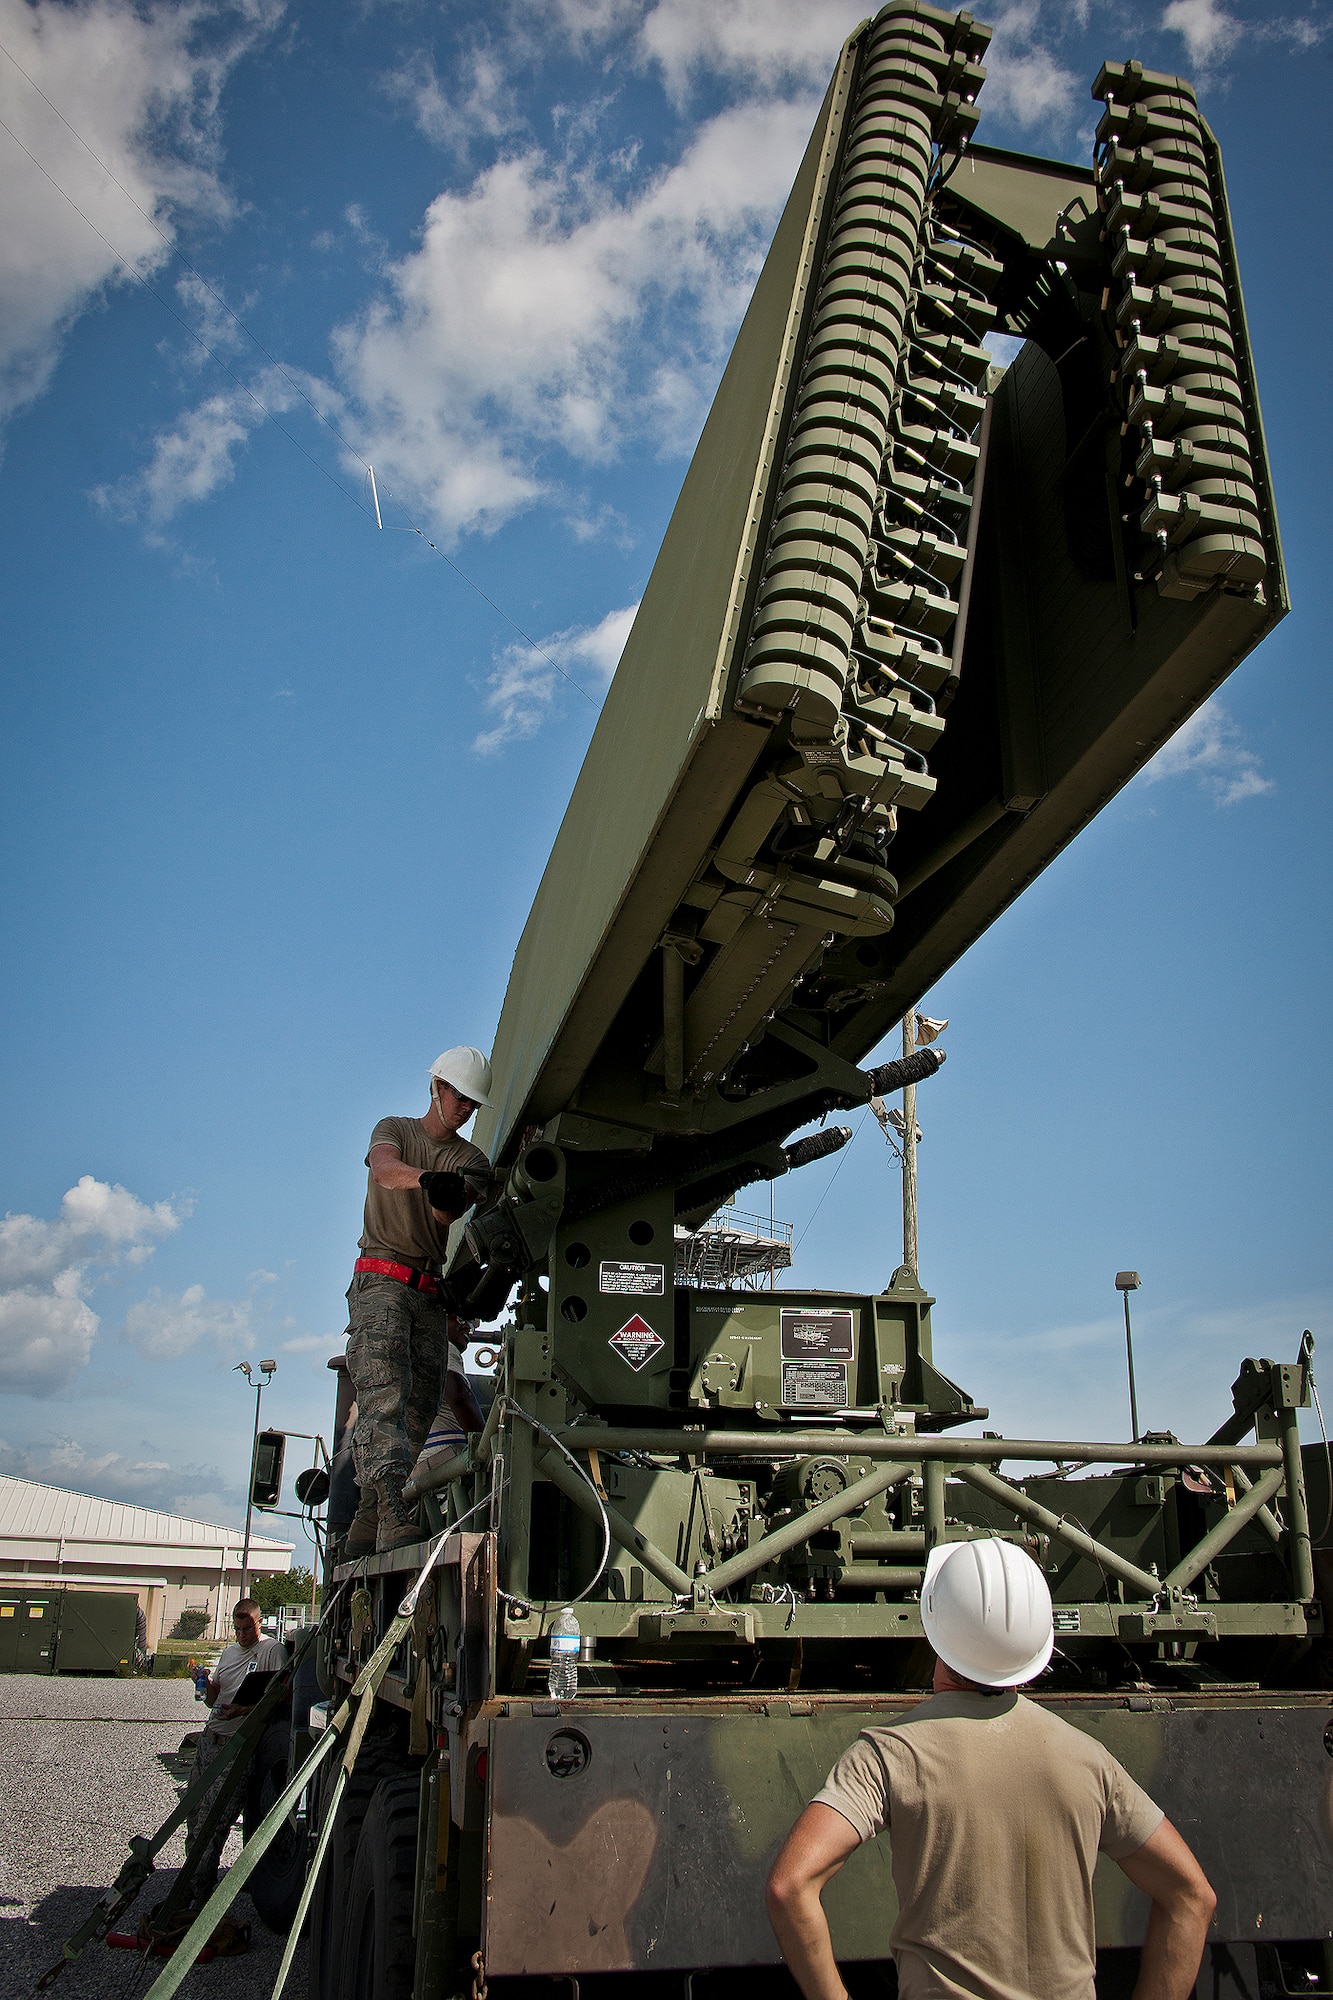 Airman 1st Class Daniel Hilliard hand cranks the deployment of a TPS-75 radar set antenna in support a 728th Air Control Squadron deployment readiness exercise called Bison Fury July 24, 2012, at Eglin Air Force Base, Fla. This exercise marks the last large-scale exercise for the squadron, which is scheduled to be deactivated in 2013. (U.S. Air Force photo/Samuel King Jr.)



